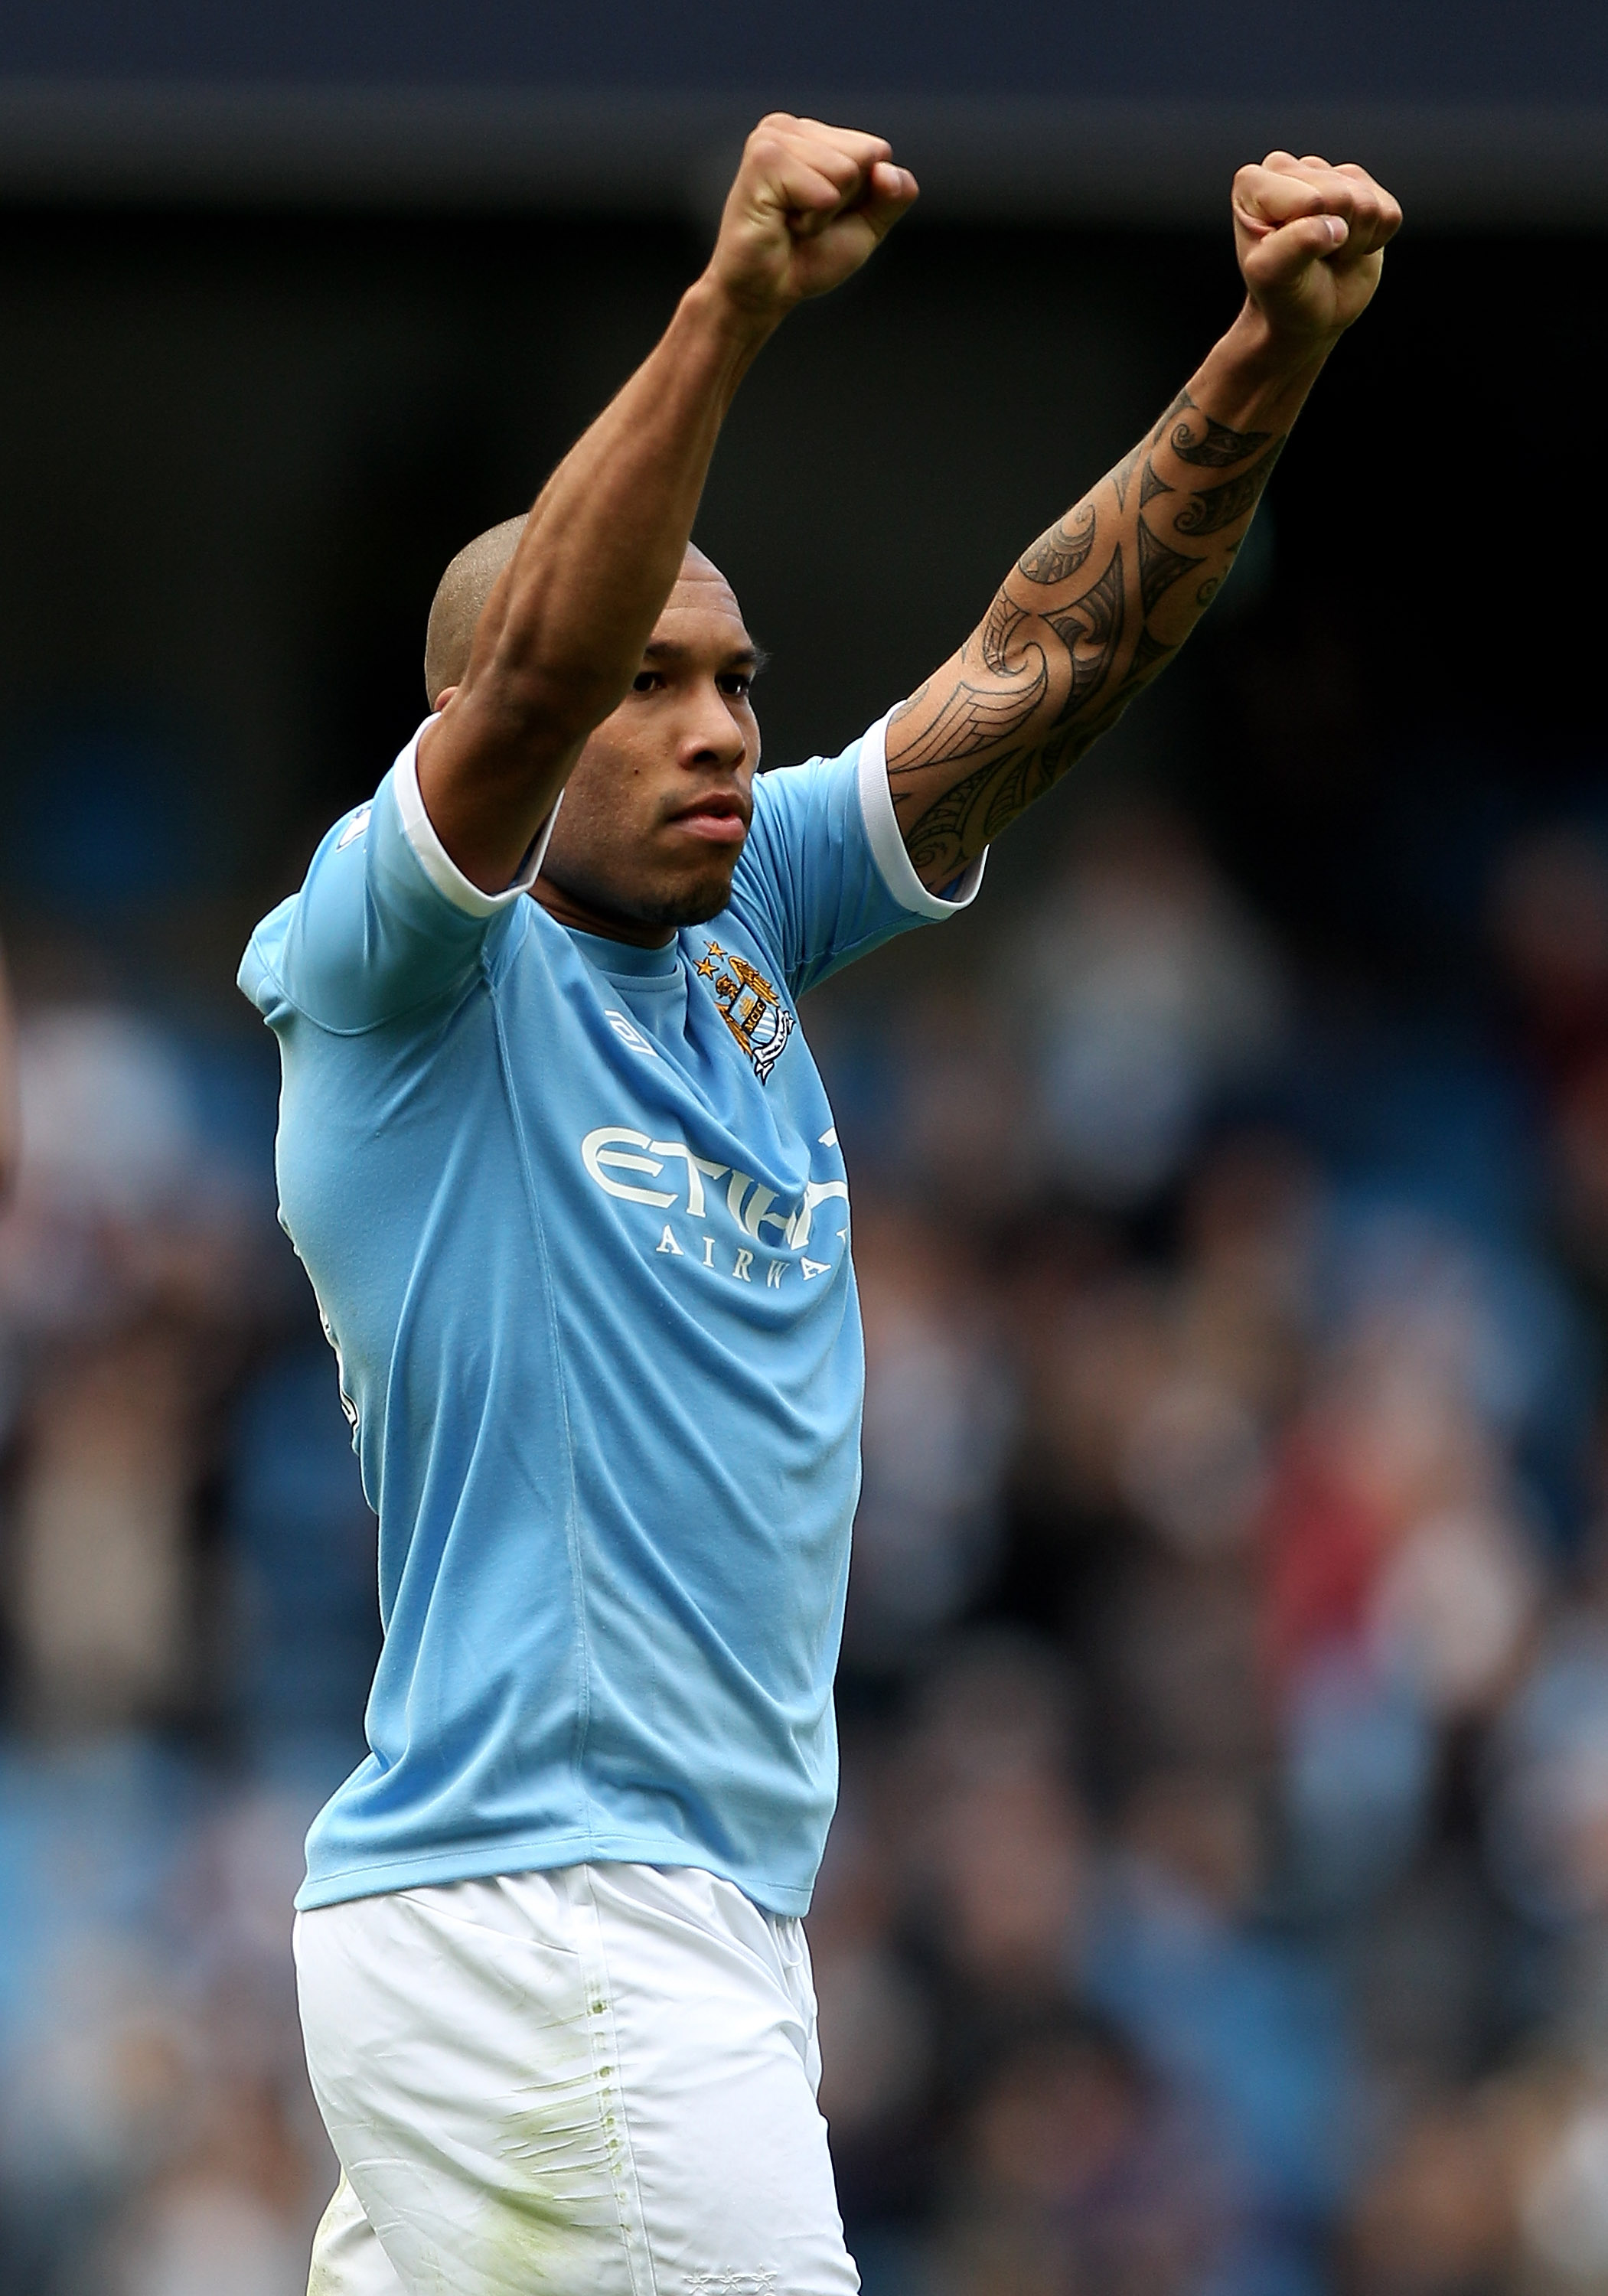 MANCHESTER, ENGLAND - SEPTEMBER 25:   Nigel de Jong of Manchester City celebrates at the end of the Barclays Premier League match between Manchester City and Chelsea at the City of Manchester Stadium on September 25, 2010 in Manchester, England. (Photo by